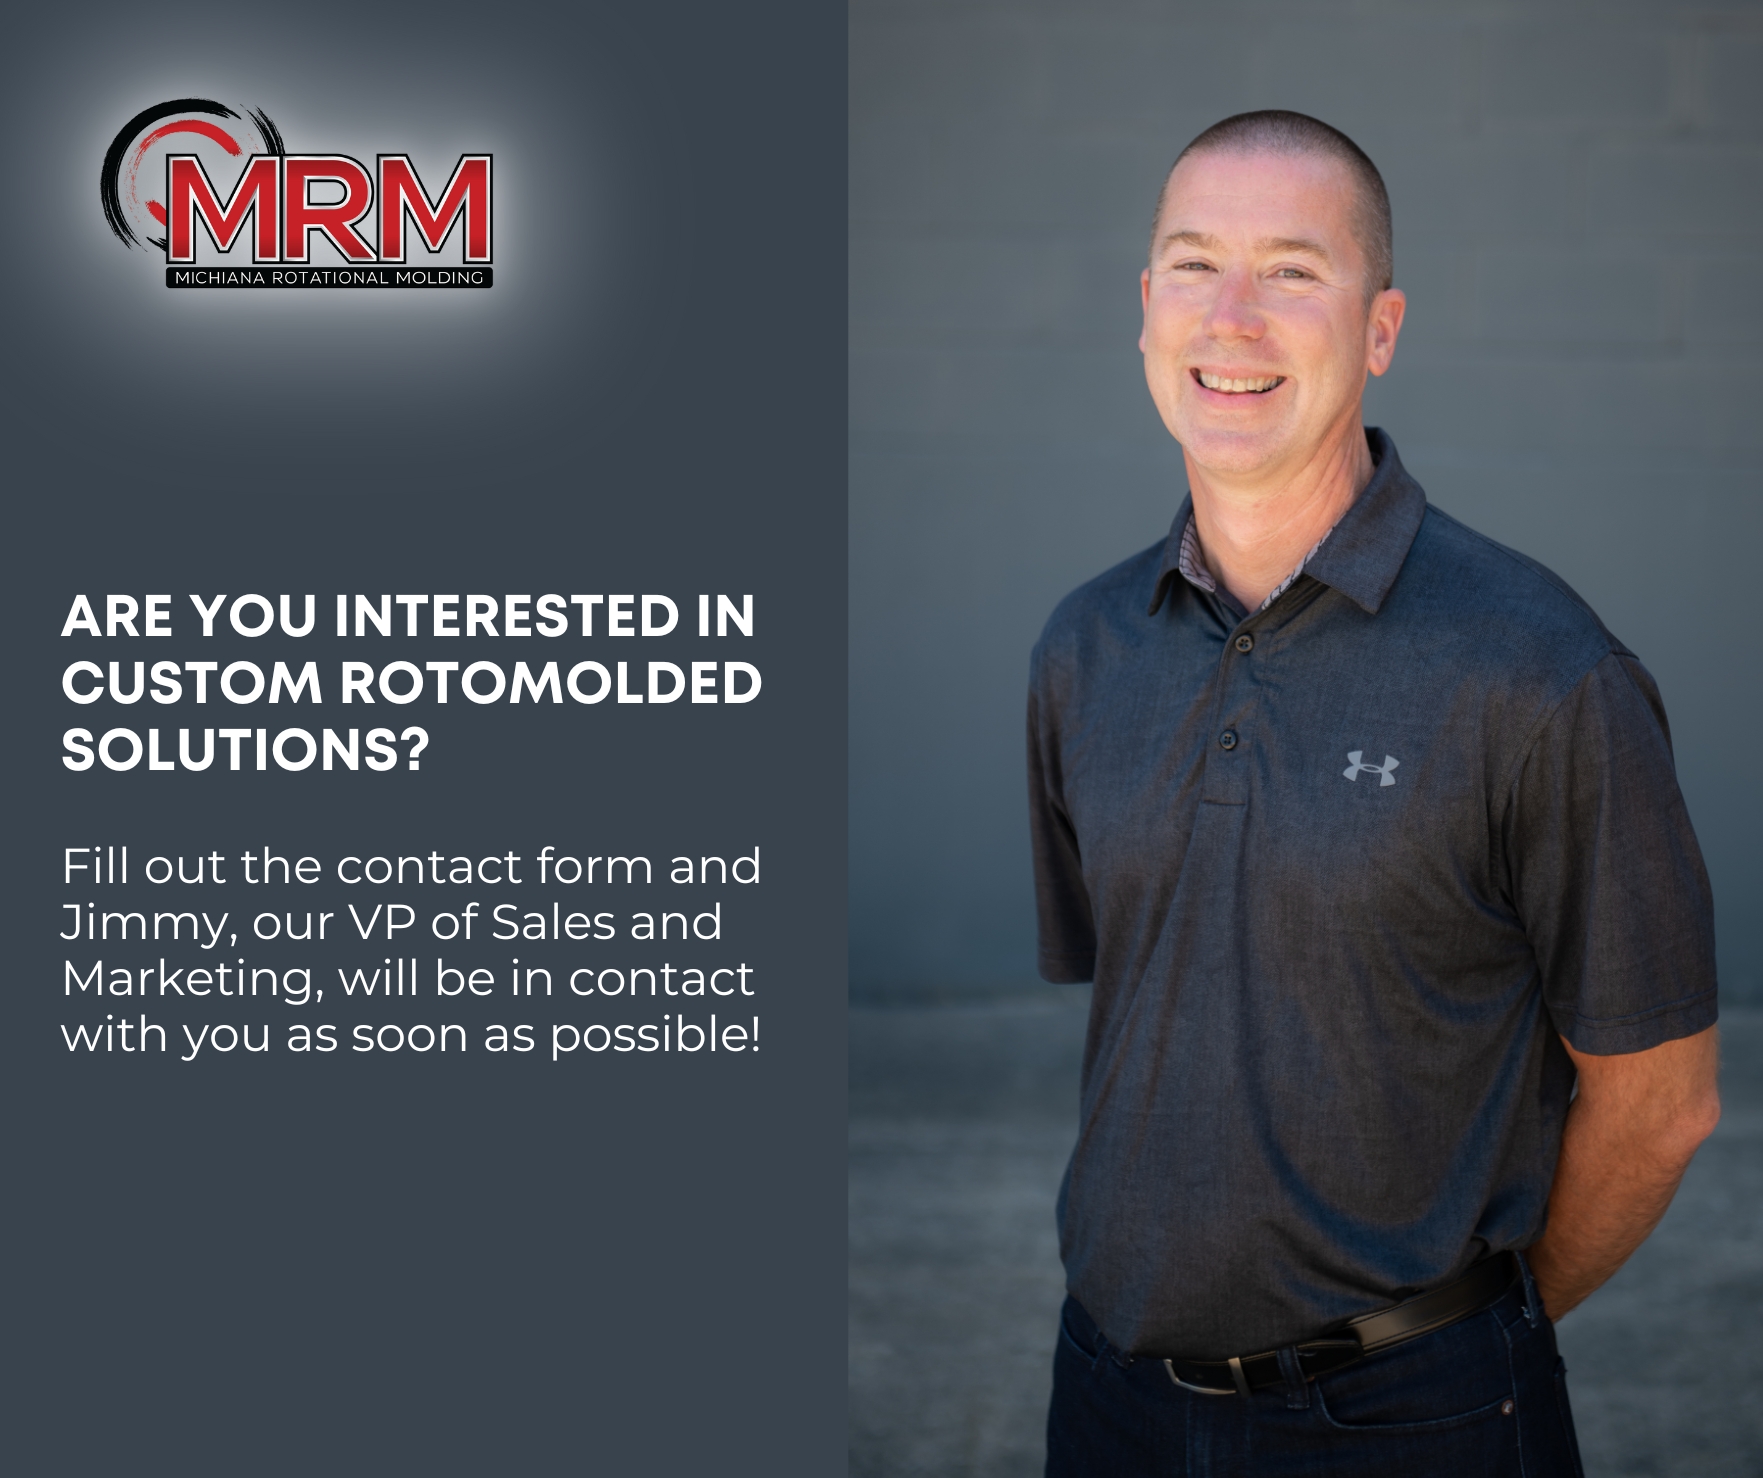 Picture of Jimmy for custom rotomolded solutions